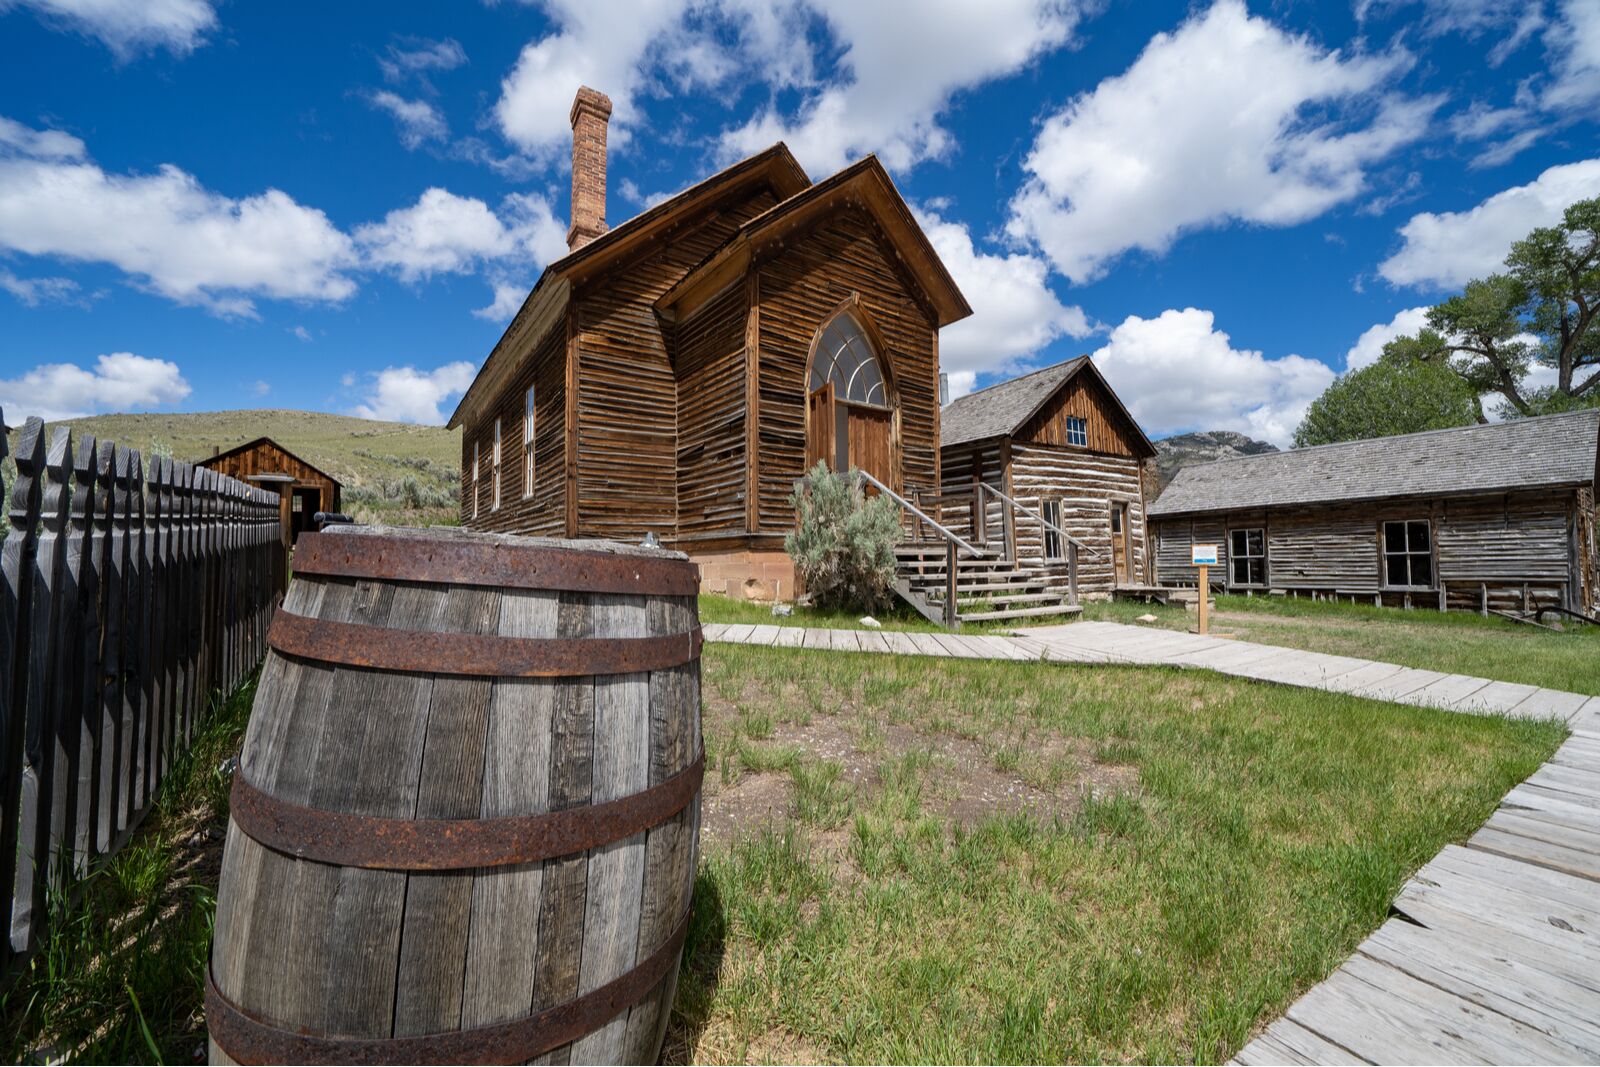 A ghost town state park in Montana